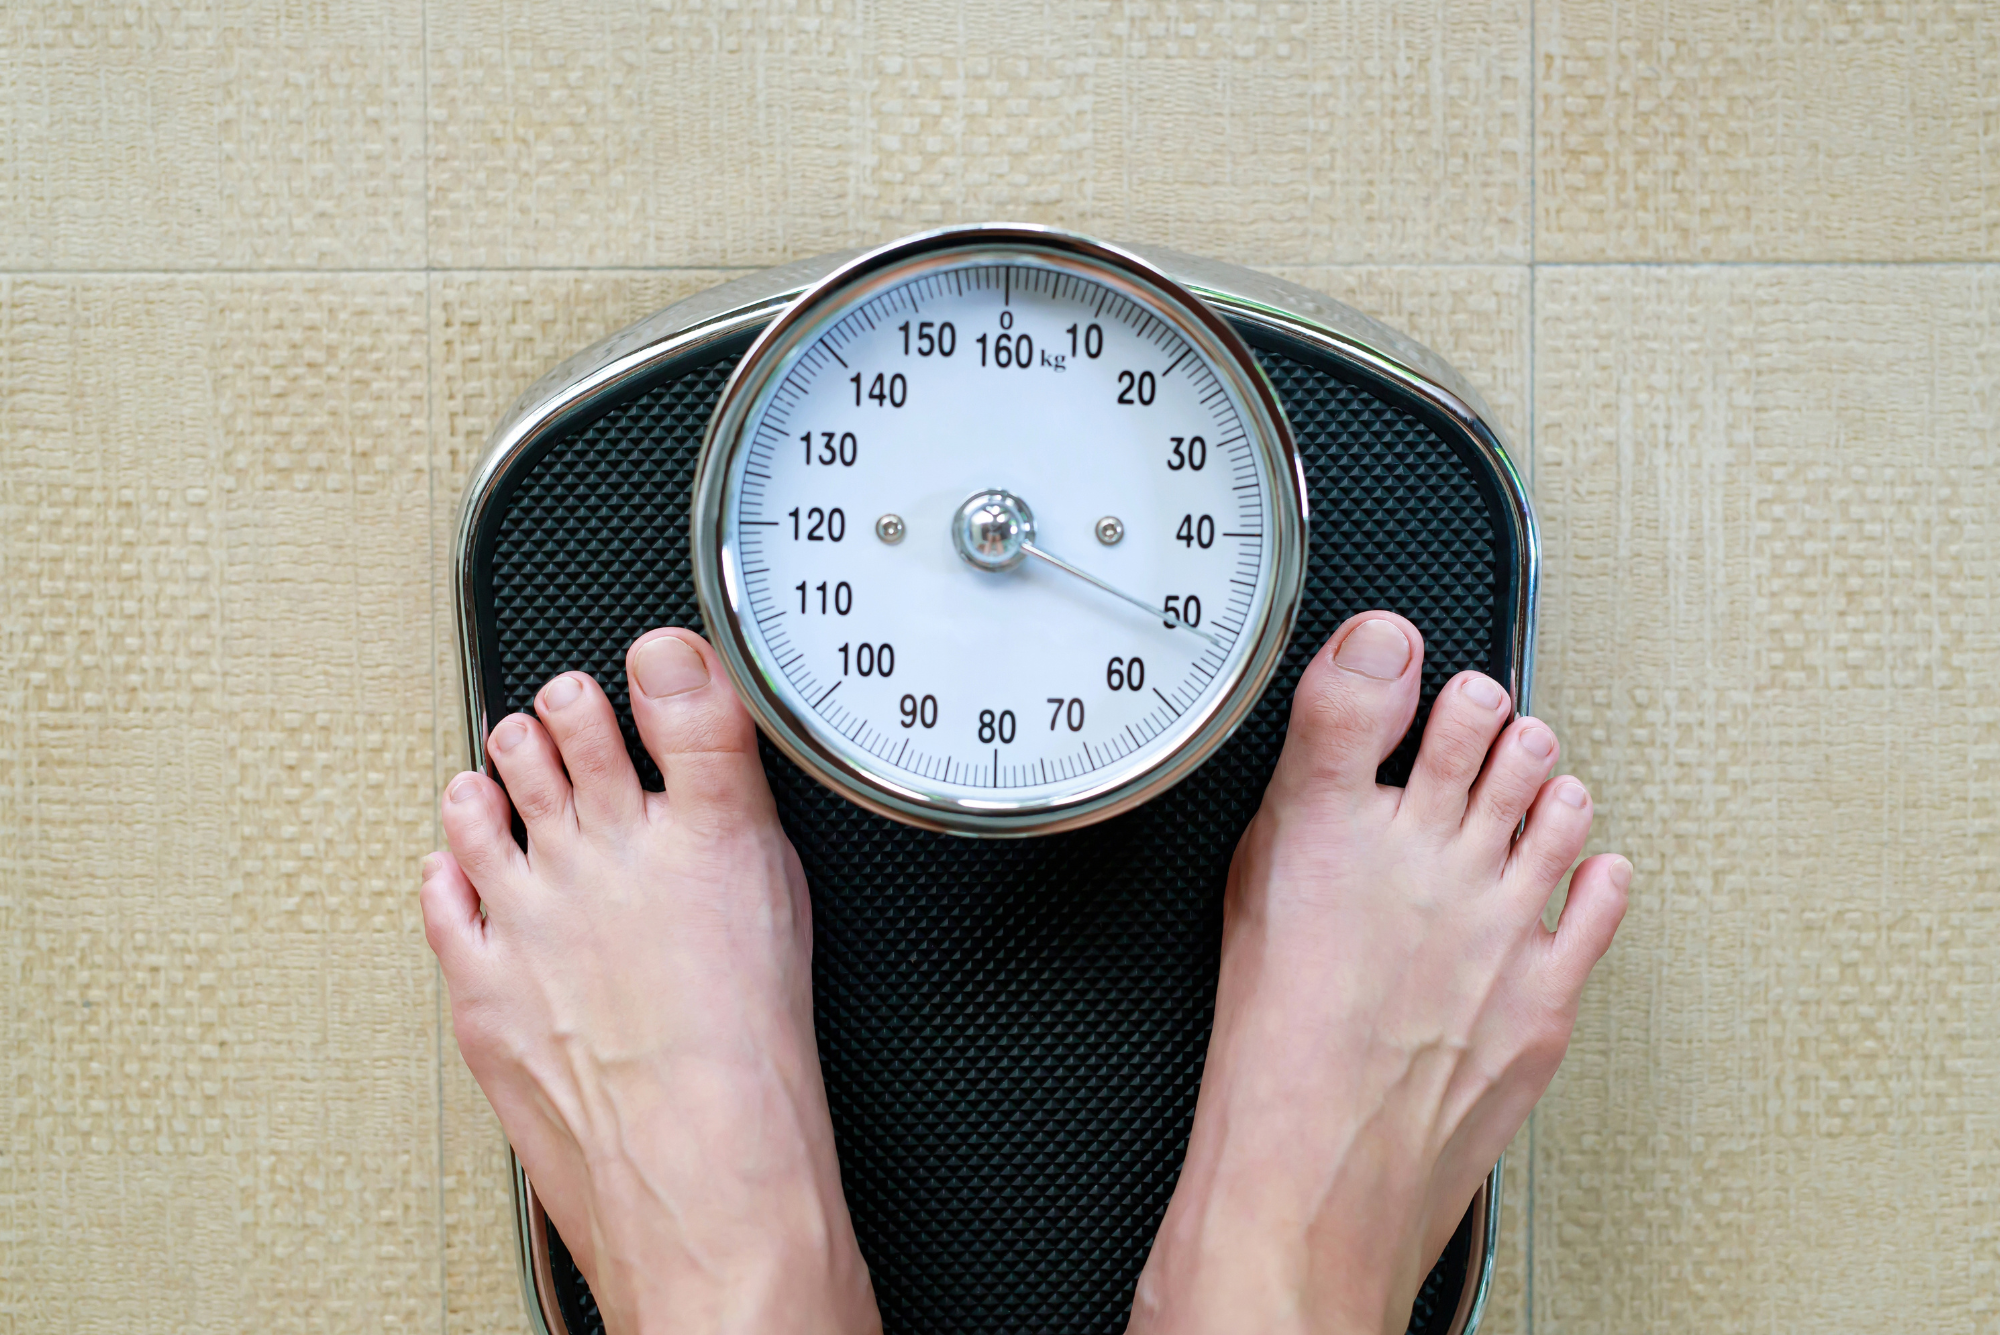 Bare feet on a scale, prompting the question: Does fat make you fat?